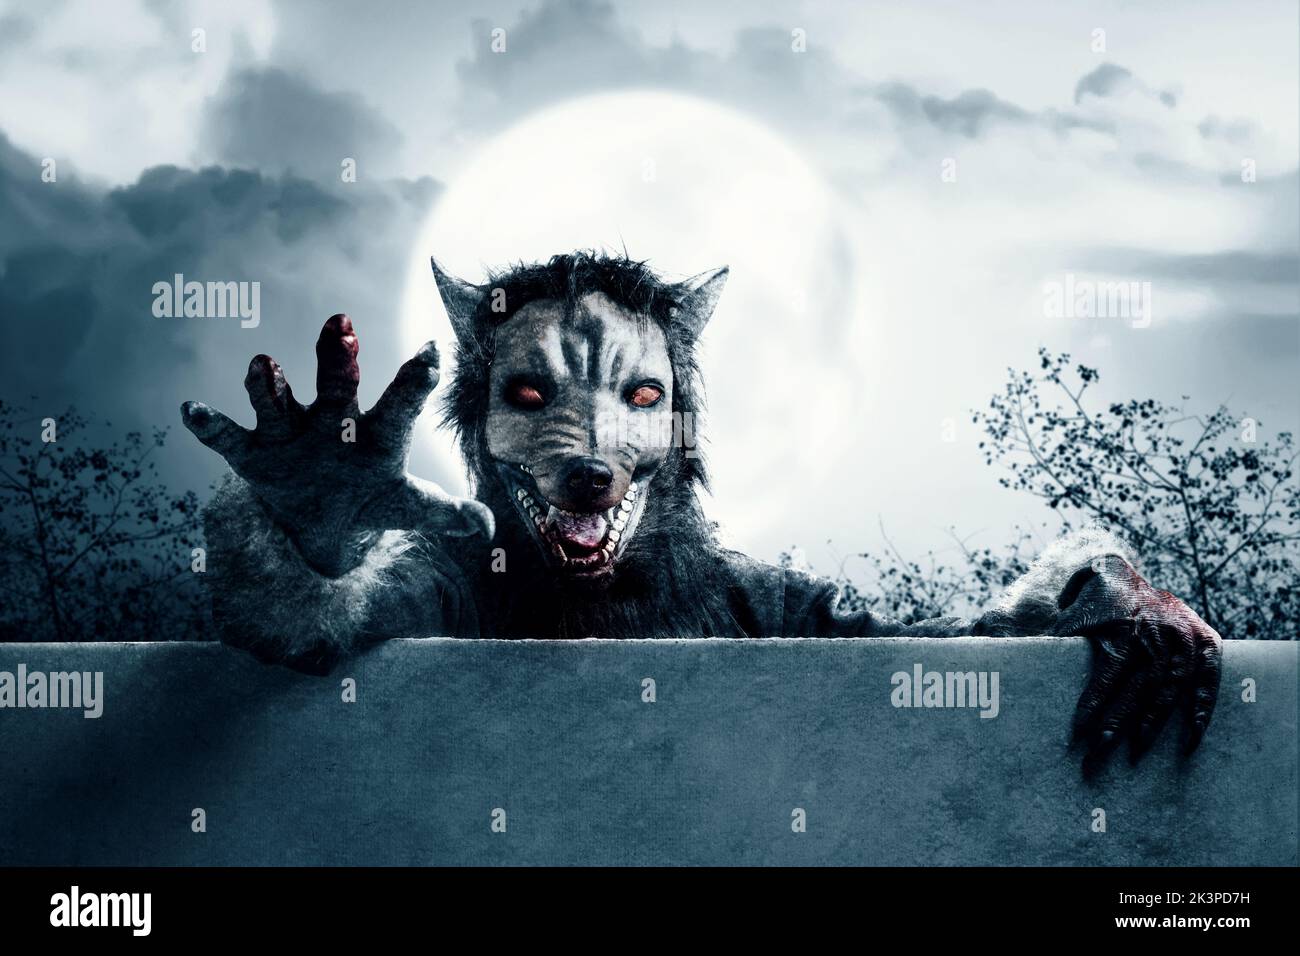 Werewolf coming from behind the wall with a full moon and night scene background. Halloween concept Stock Photo